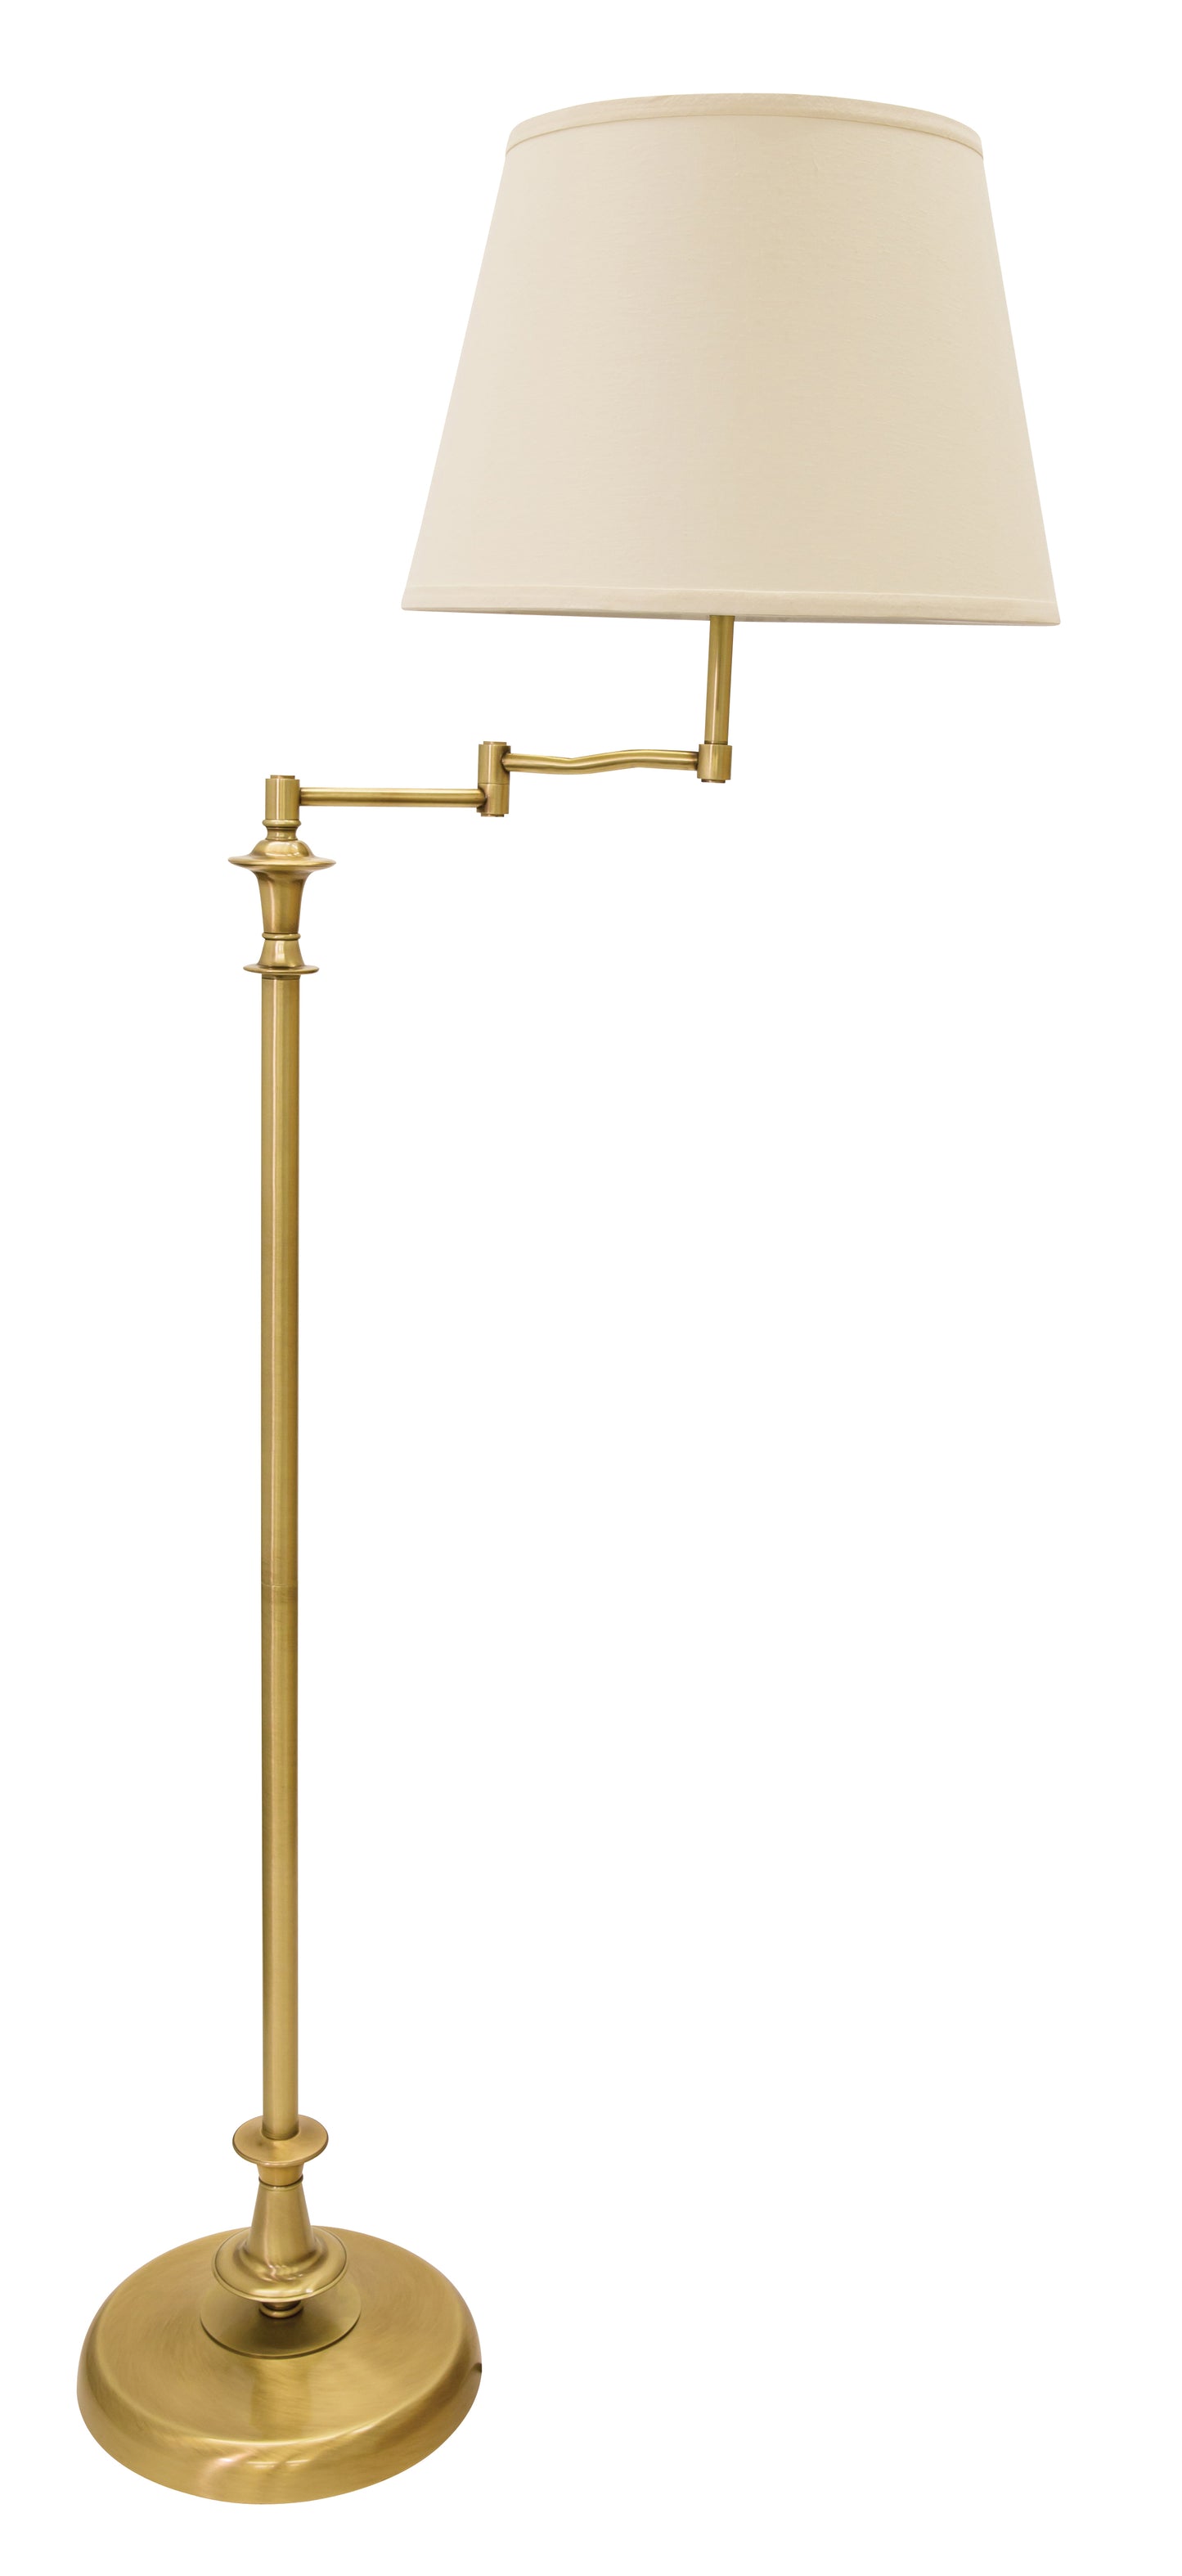 House of Troy Randolph Swing Arm Floor Lamp in Antique Brass RA301-AB